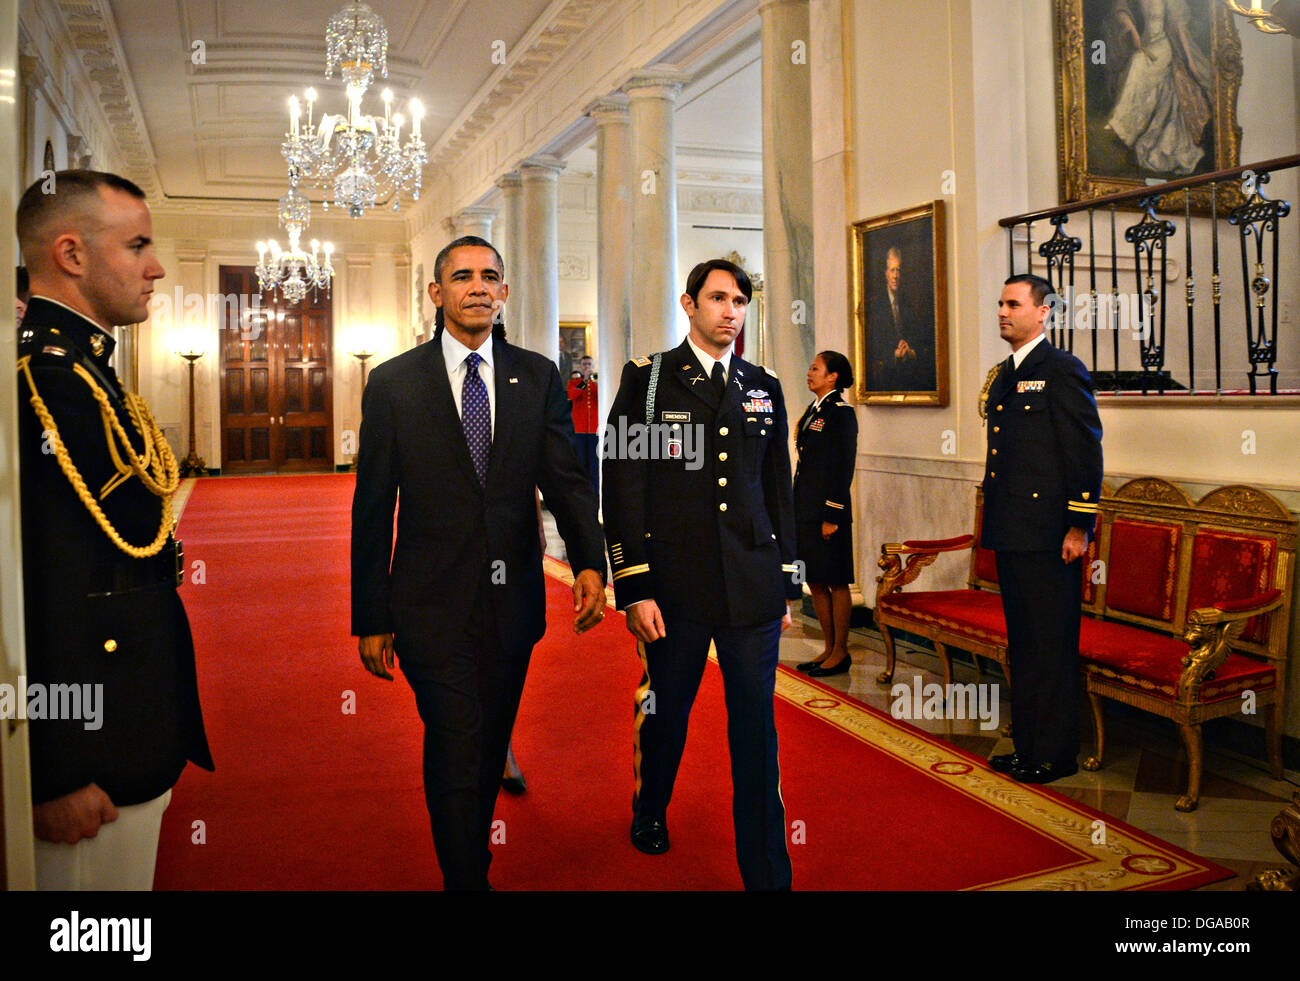 US President Barack Obama escorts Former US Army Capt. William D. Swenson to the East Room of the White House where he will be presented the Medal of Honor October 15, 2013 in Washington, DC. The Medal of Honor is the nation's highest military honor. Stock Photo